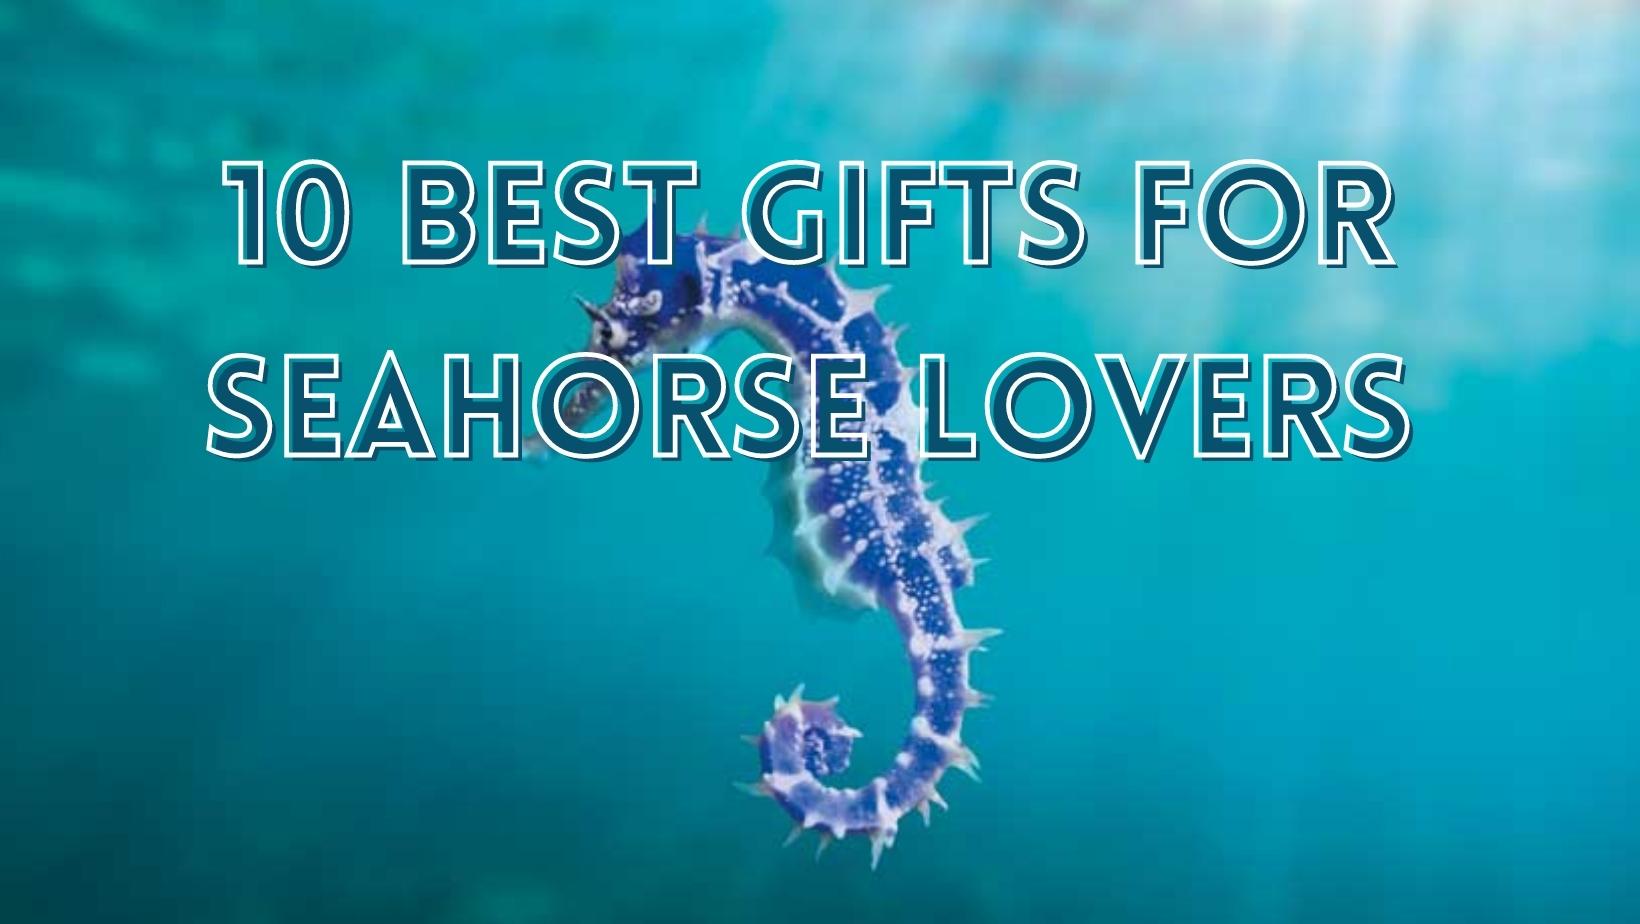 Best gifts for seahorse lovers